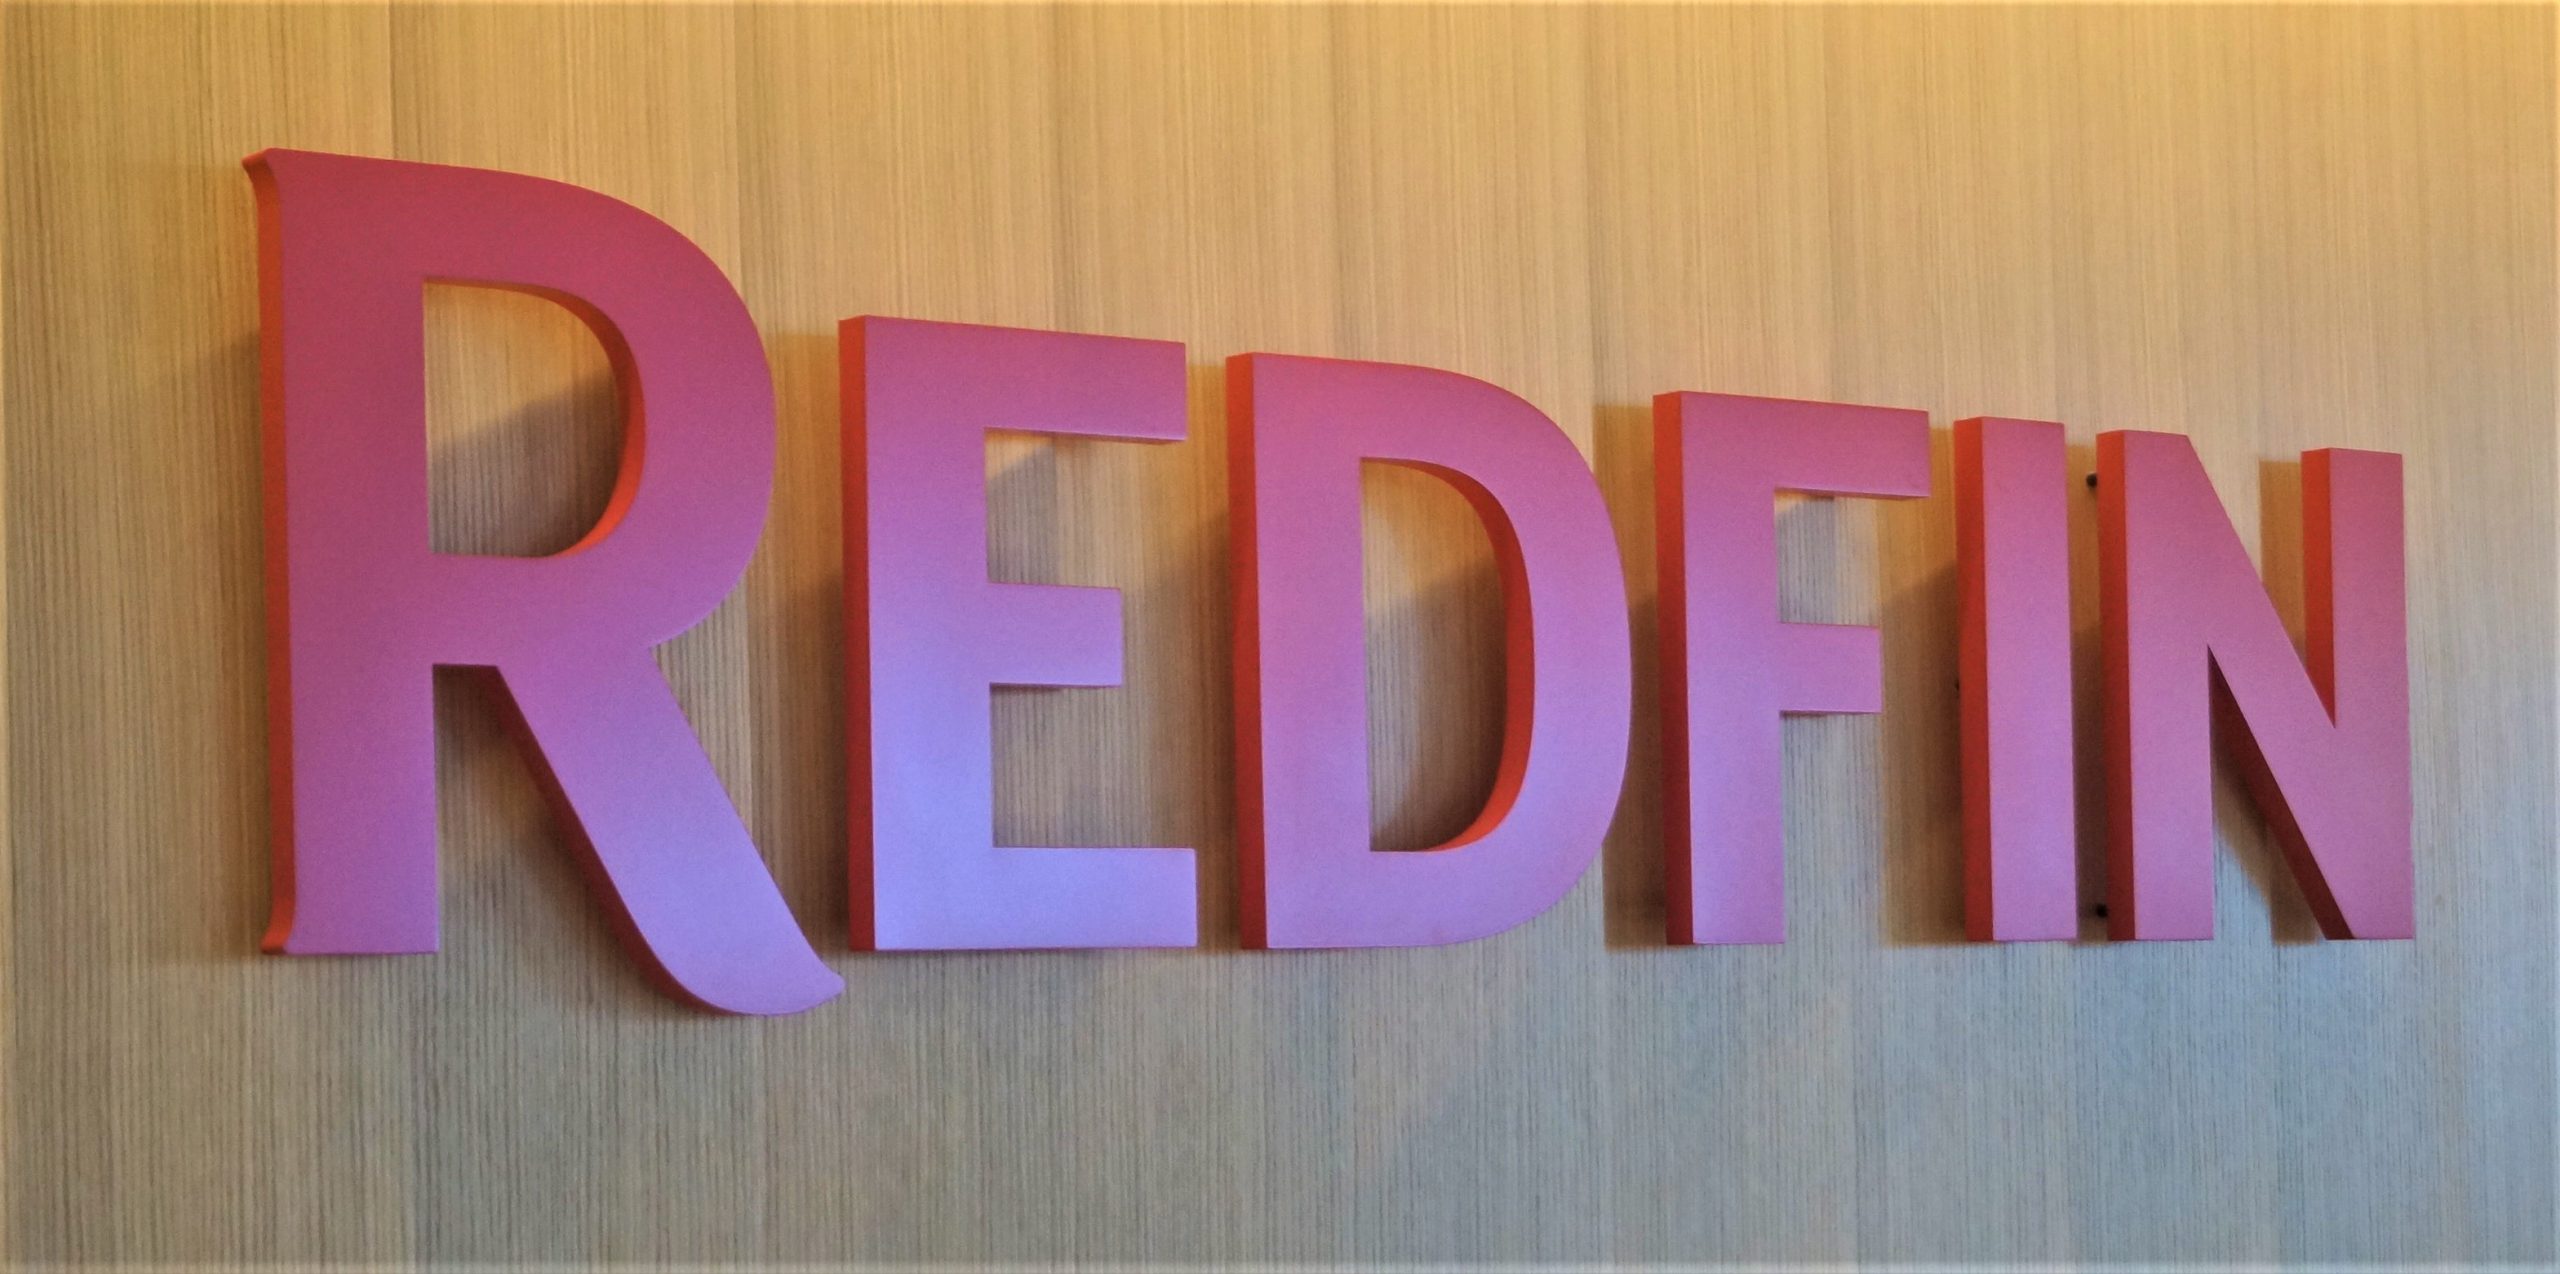 Redfin beats Q4 earnings estimates with $244M in revenue and record traffic